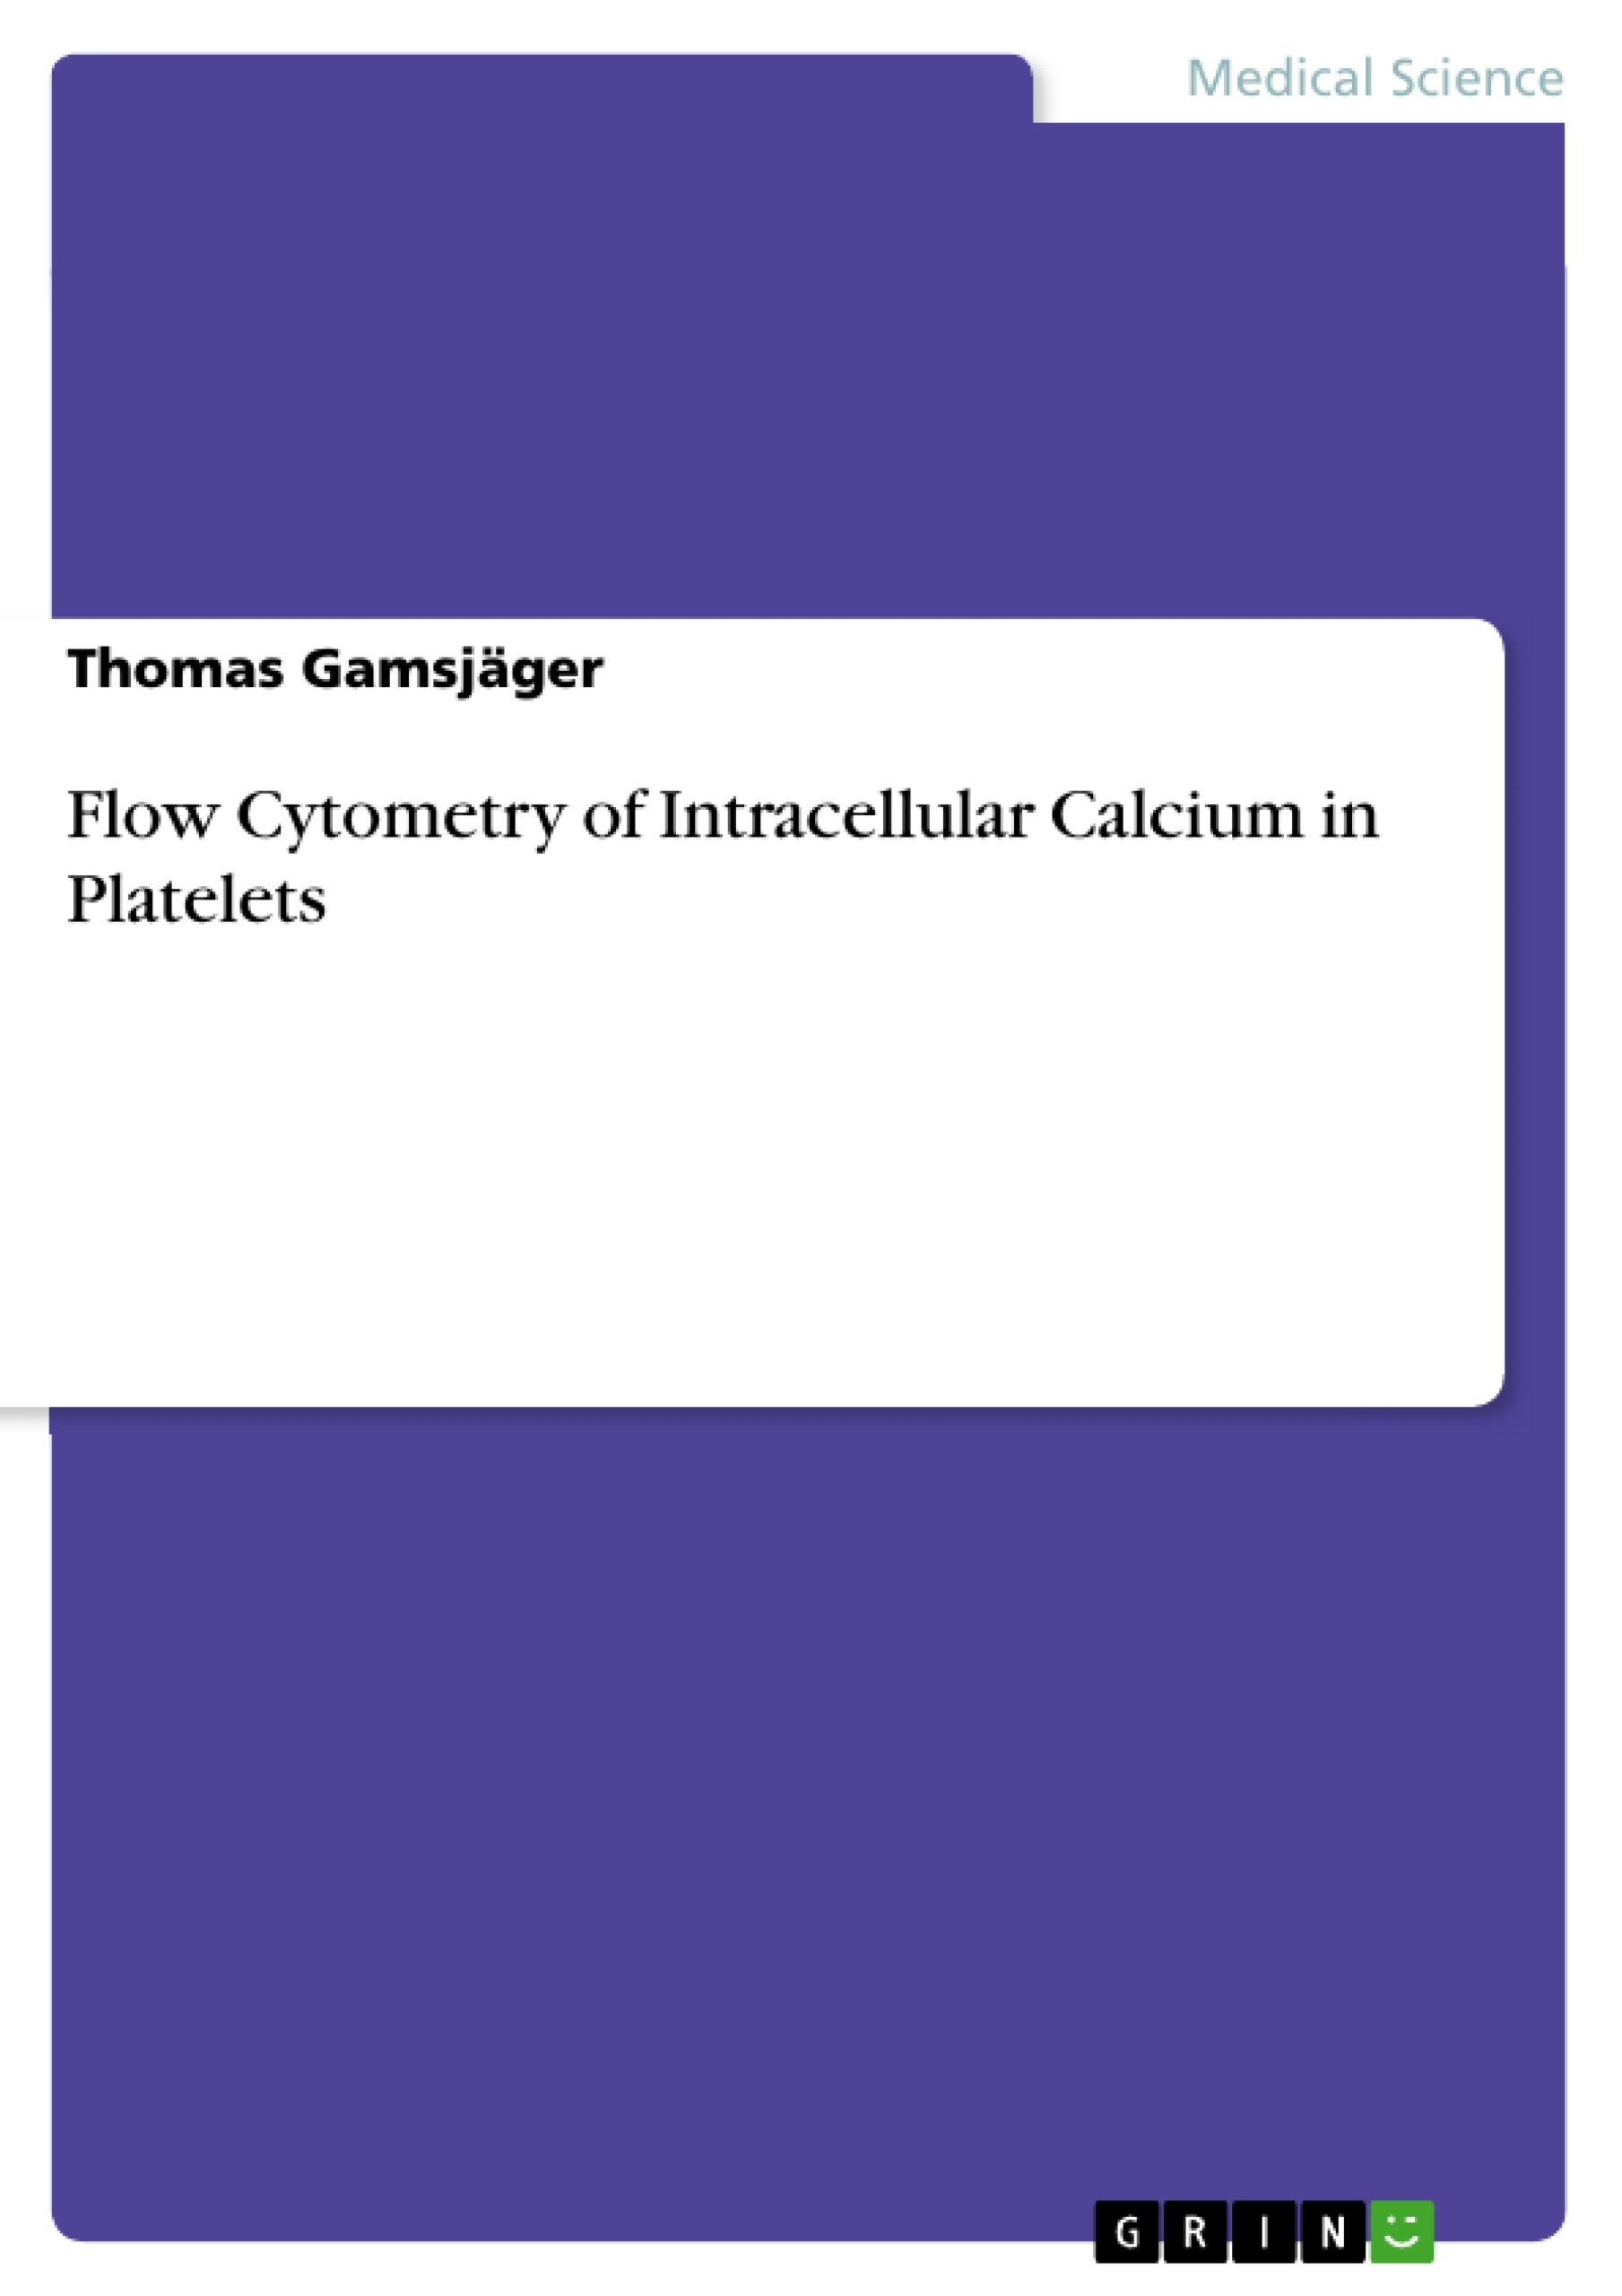 Title: Flow Cytometry of Intracellular Calcium in Platelets